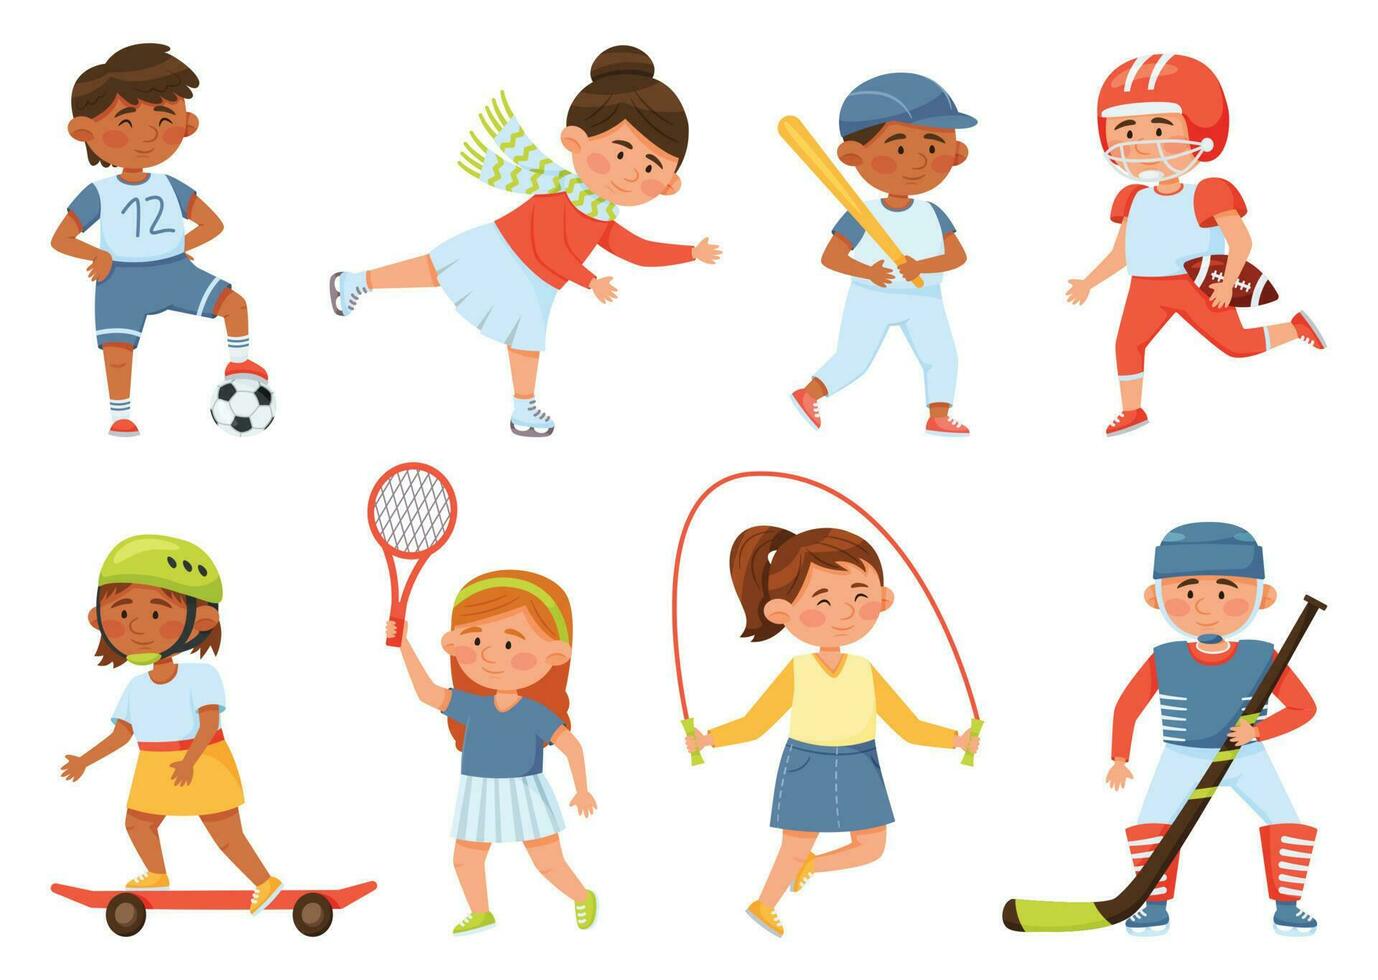 Cartoon happy school children playing sports and exercising. Sport activities for kids baseball, skipping rope, tennis, skateboarding, vector set